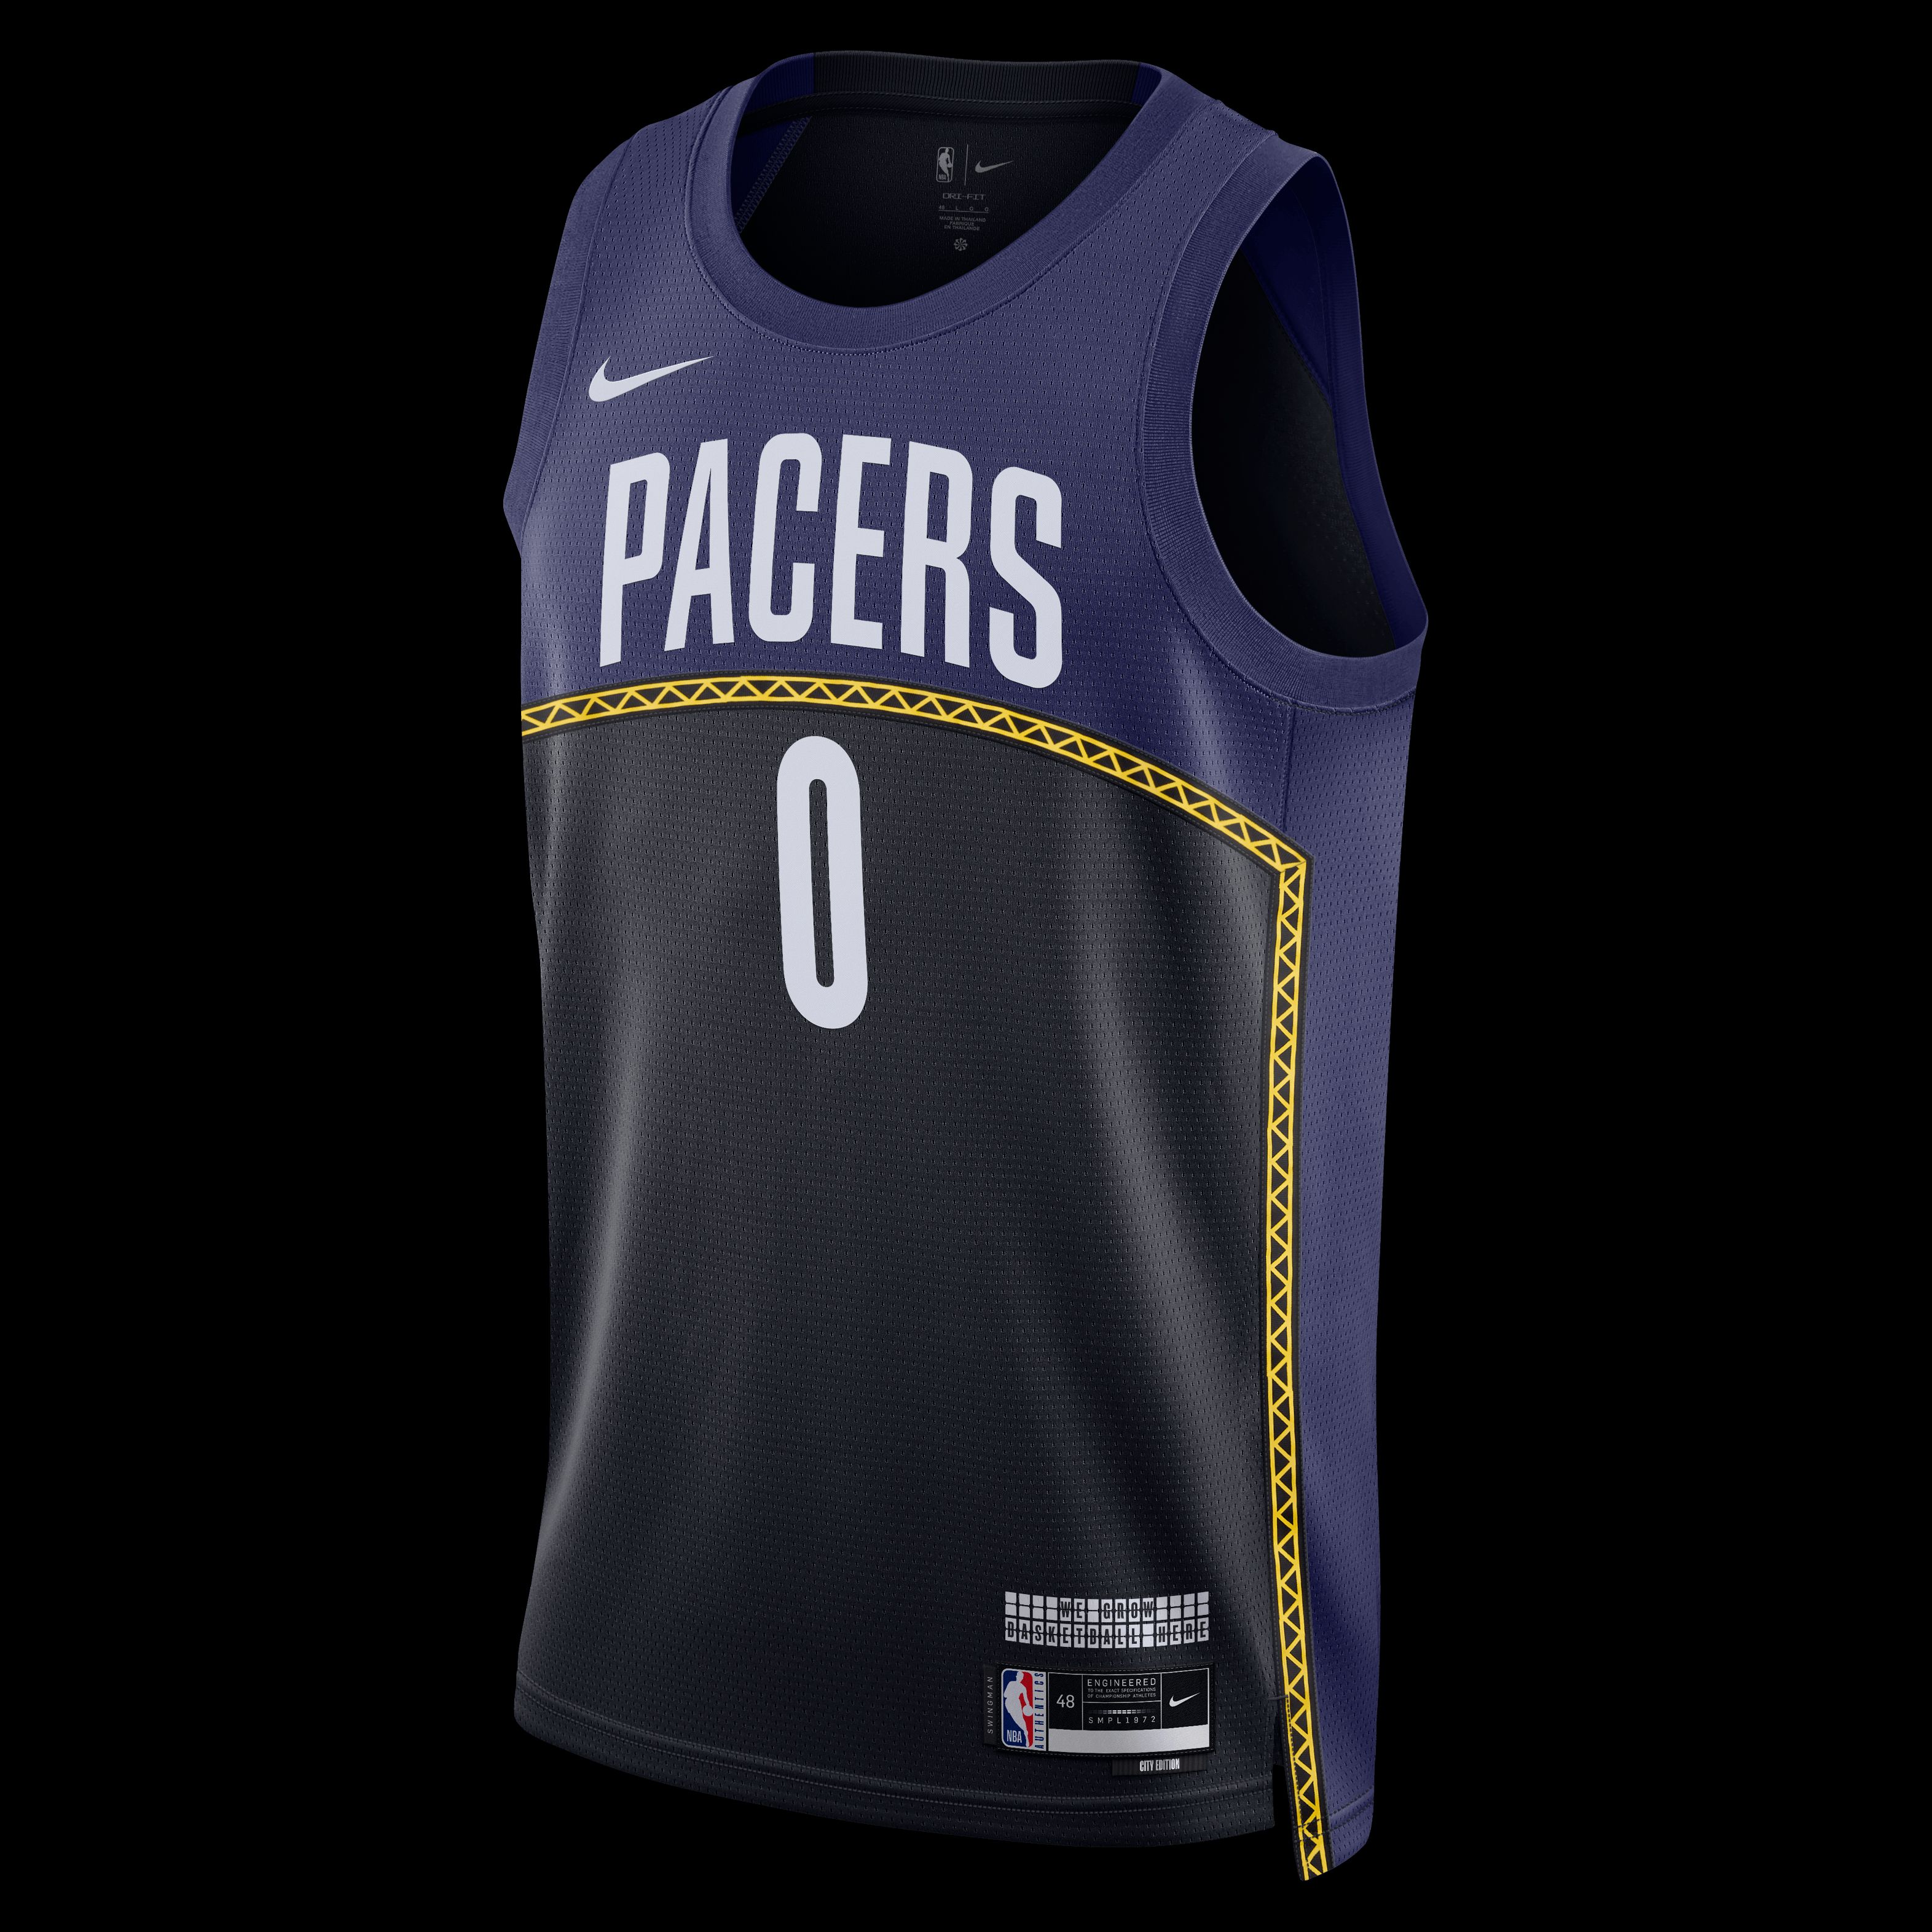 Pacers unveil sharp new Nike jerseys that feature some dramatic